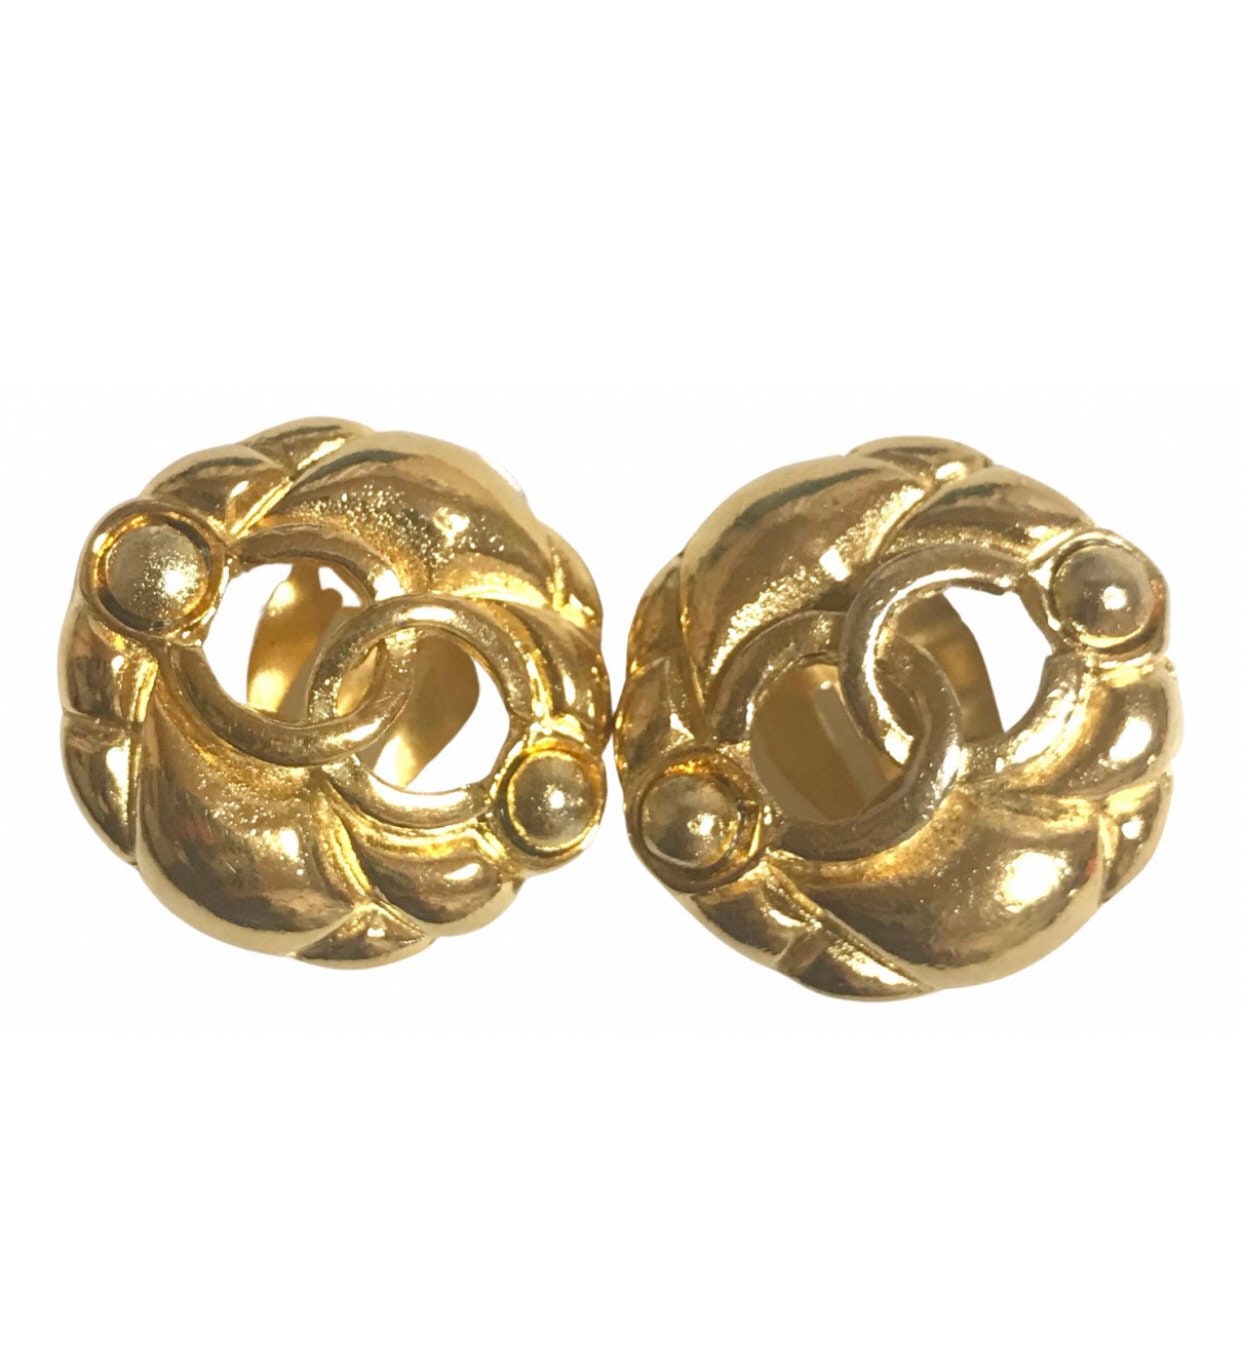 Buy Chanel Rhinestone Earrings Crystal Vintage Gold Tone Quilted Online in  India 